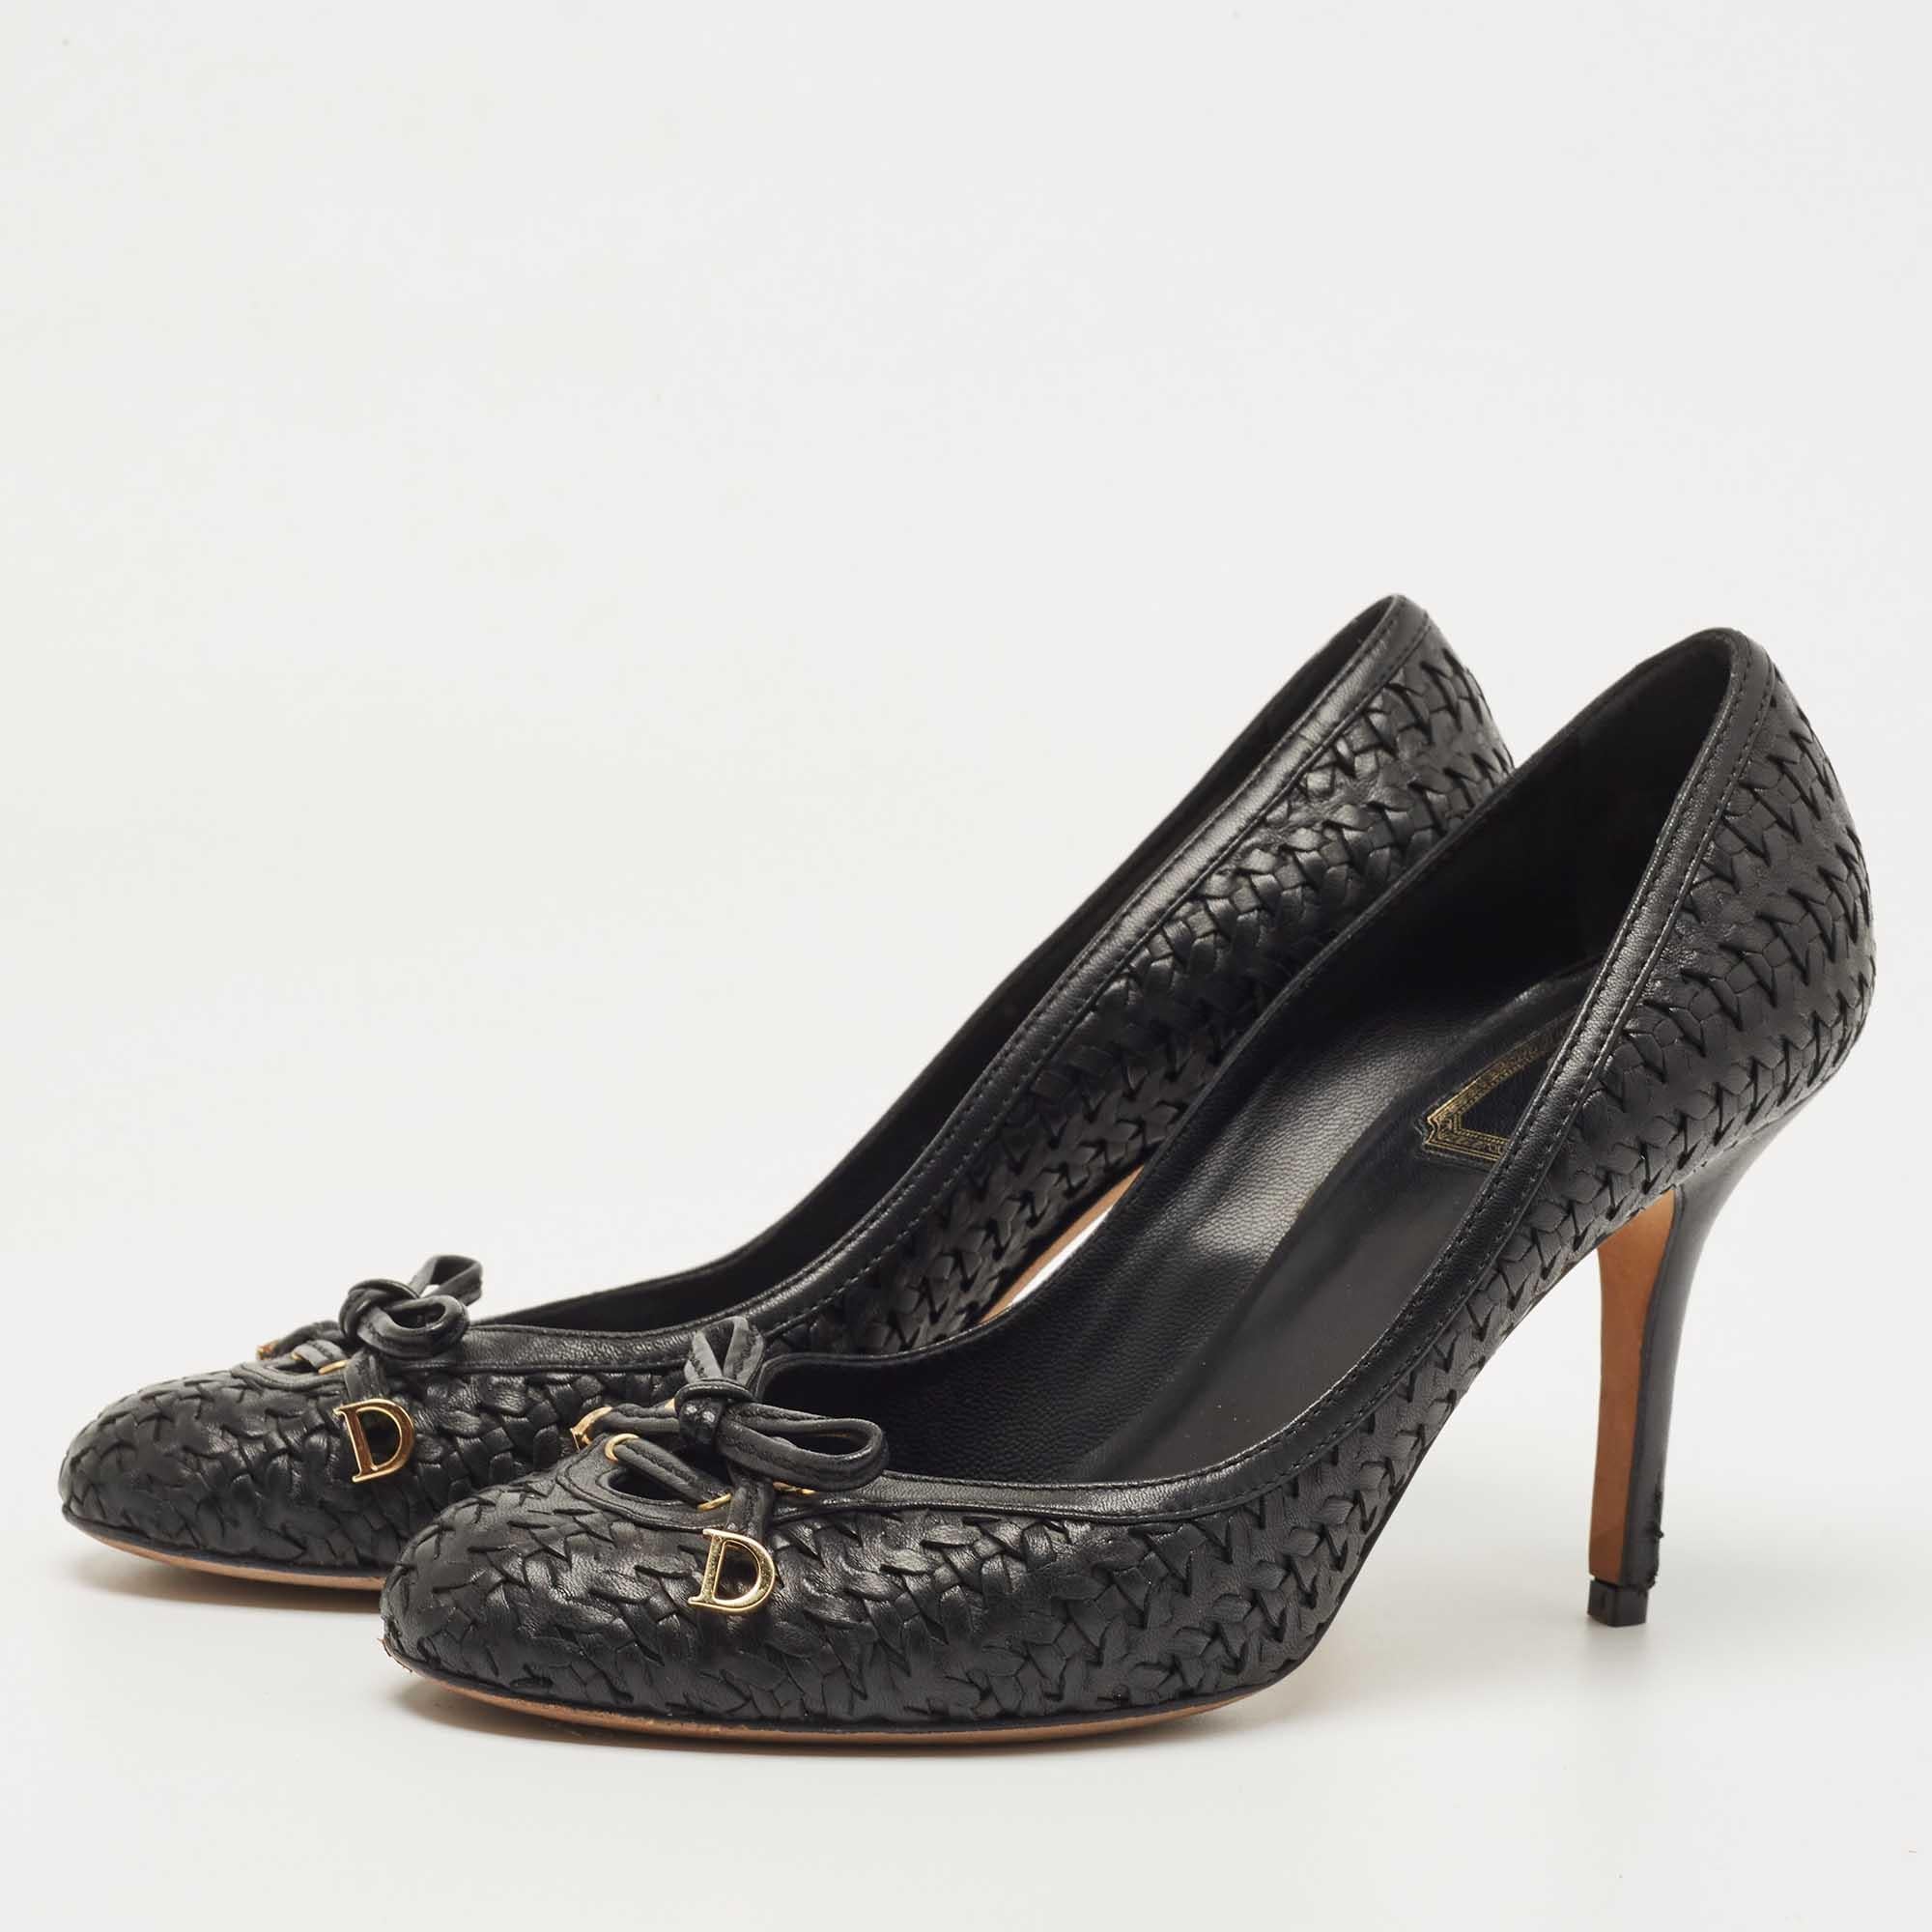 Women's Dior Black Woven Leather CD Charm Bow Pumps Size 38.5